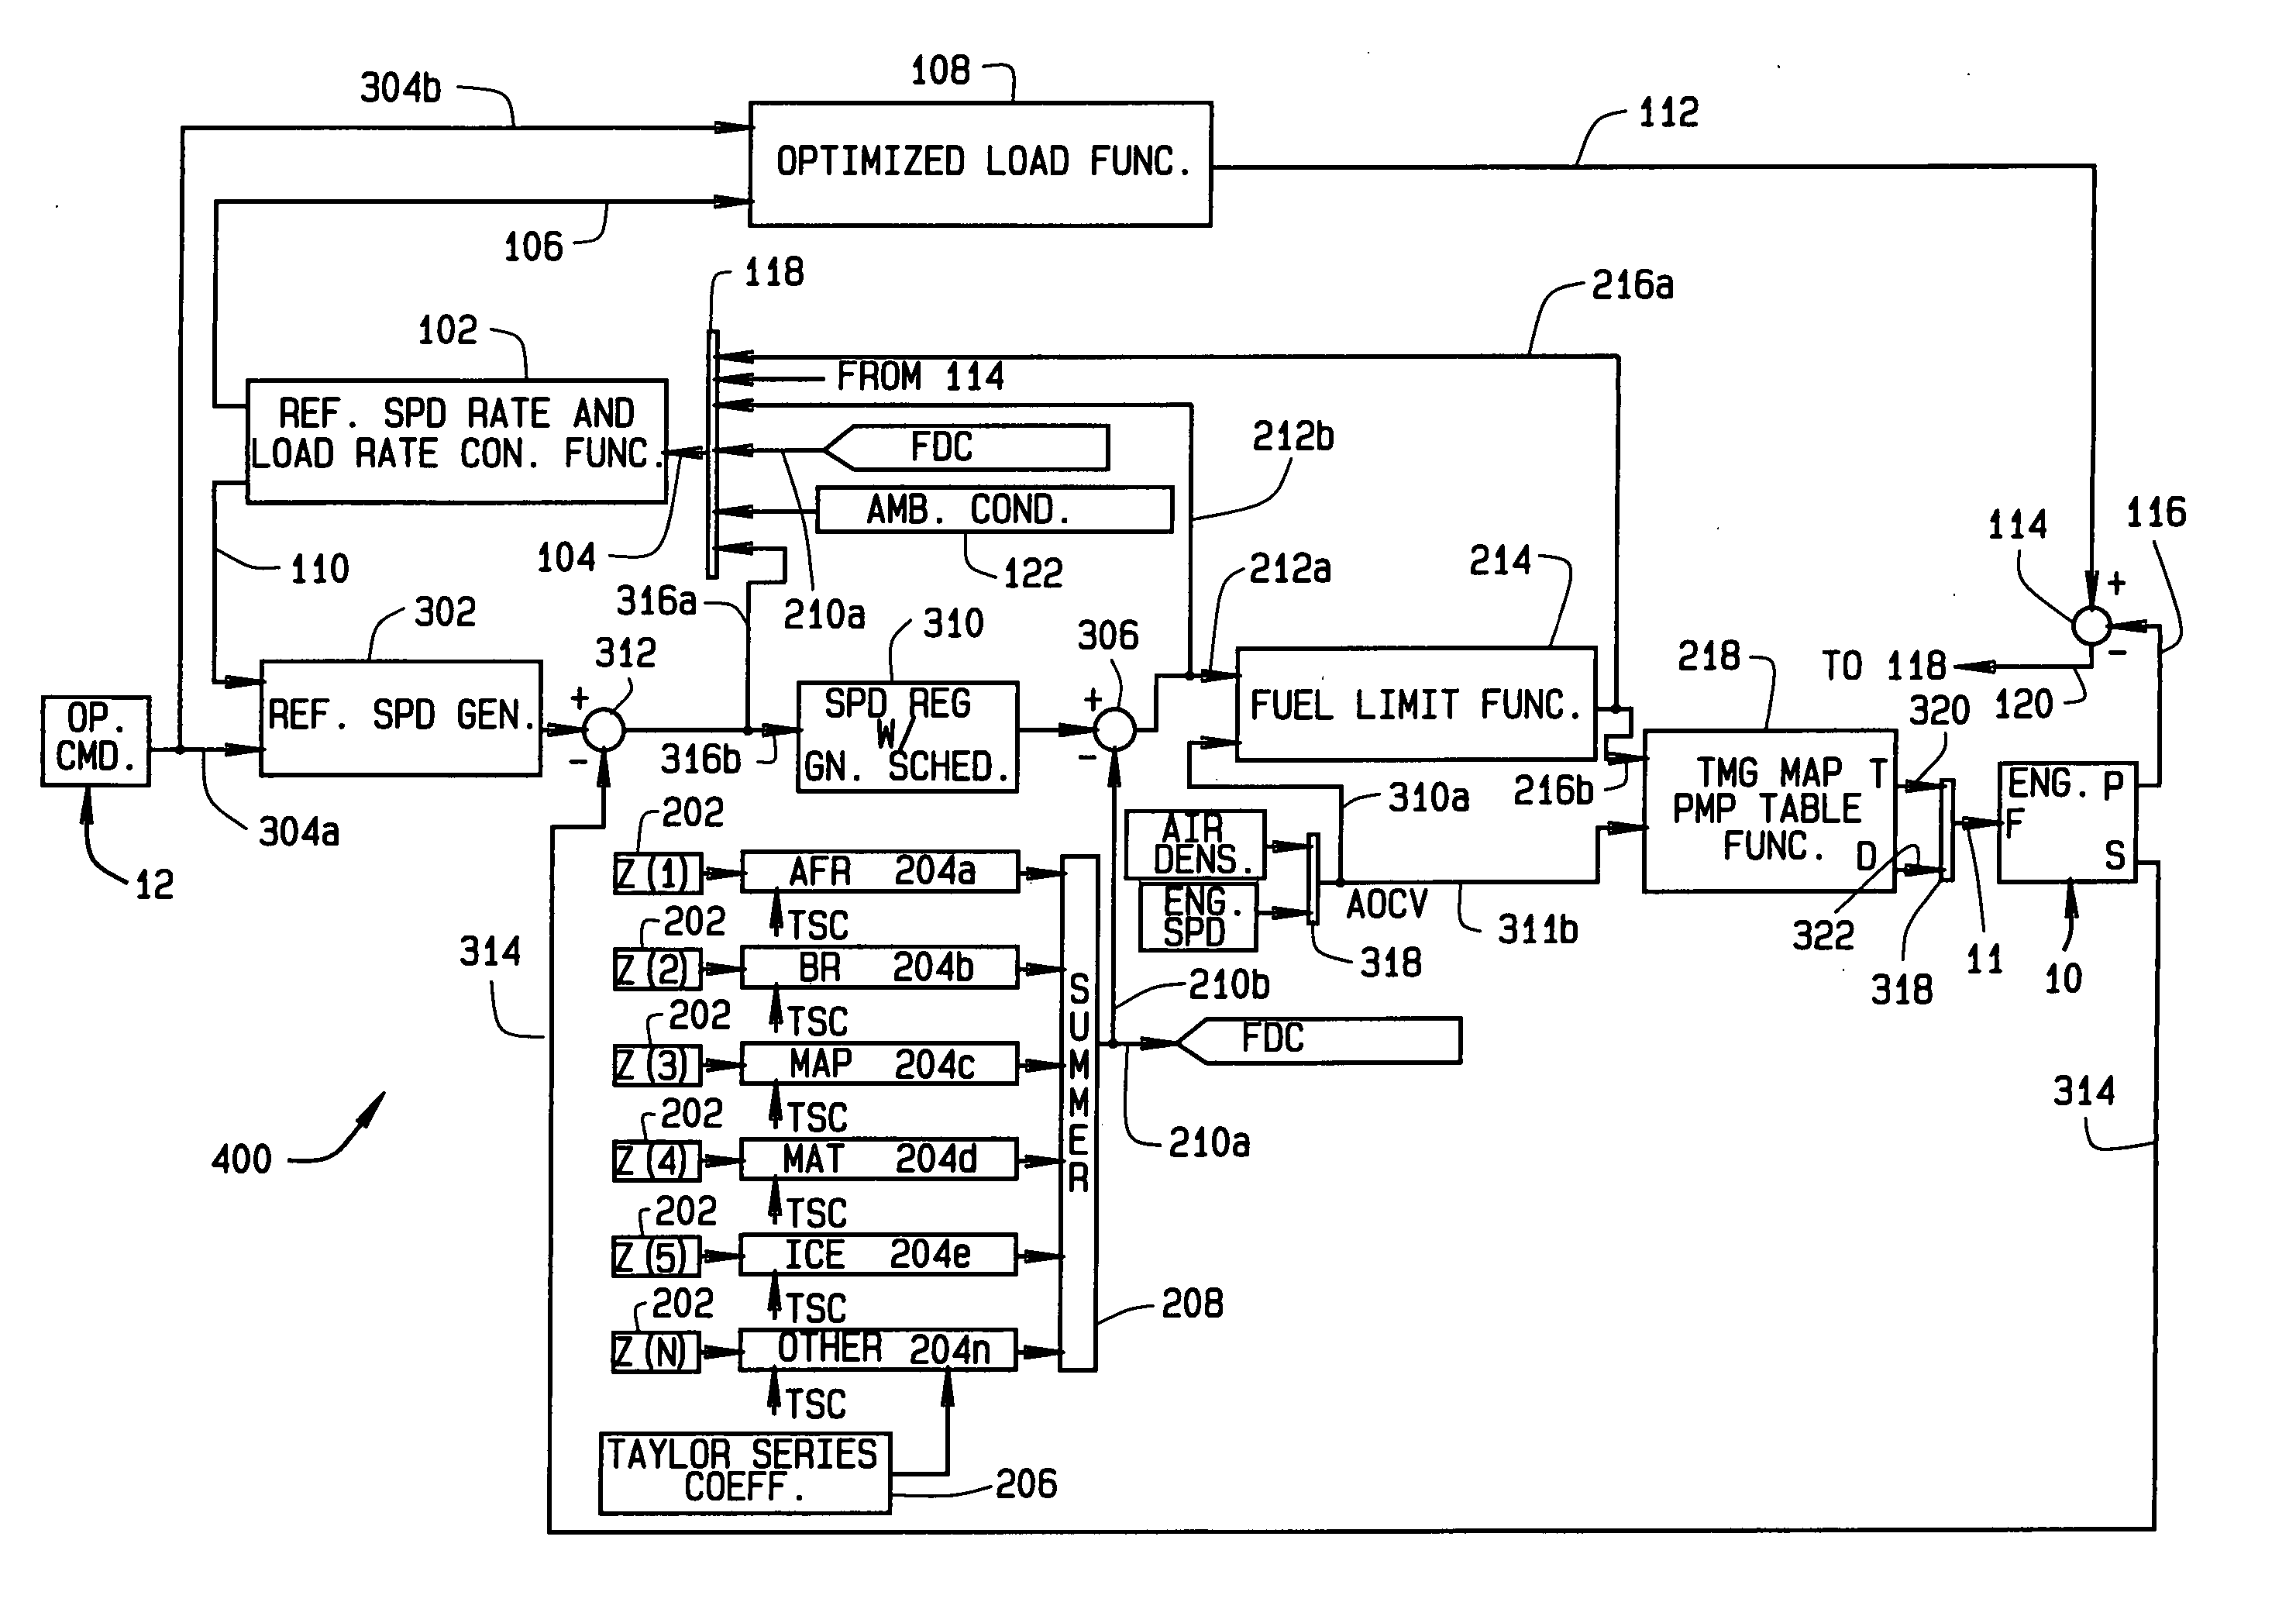 Diesel engine control system with optimized fuel delivery